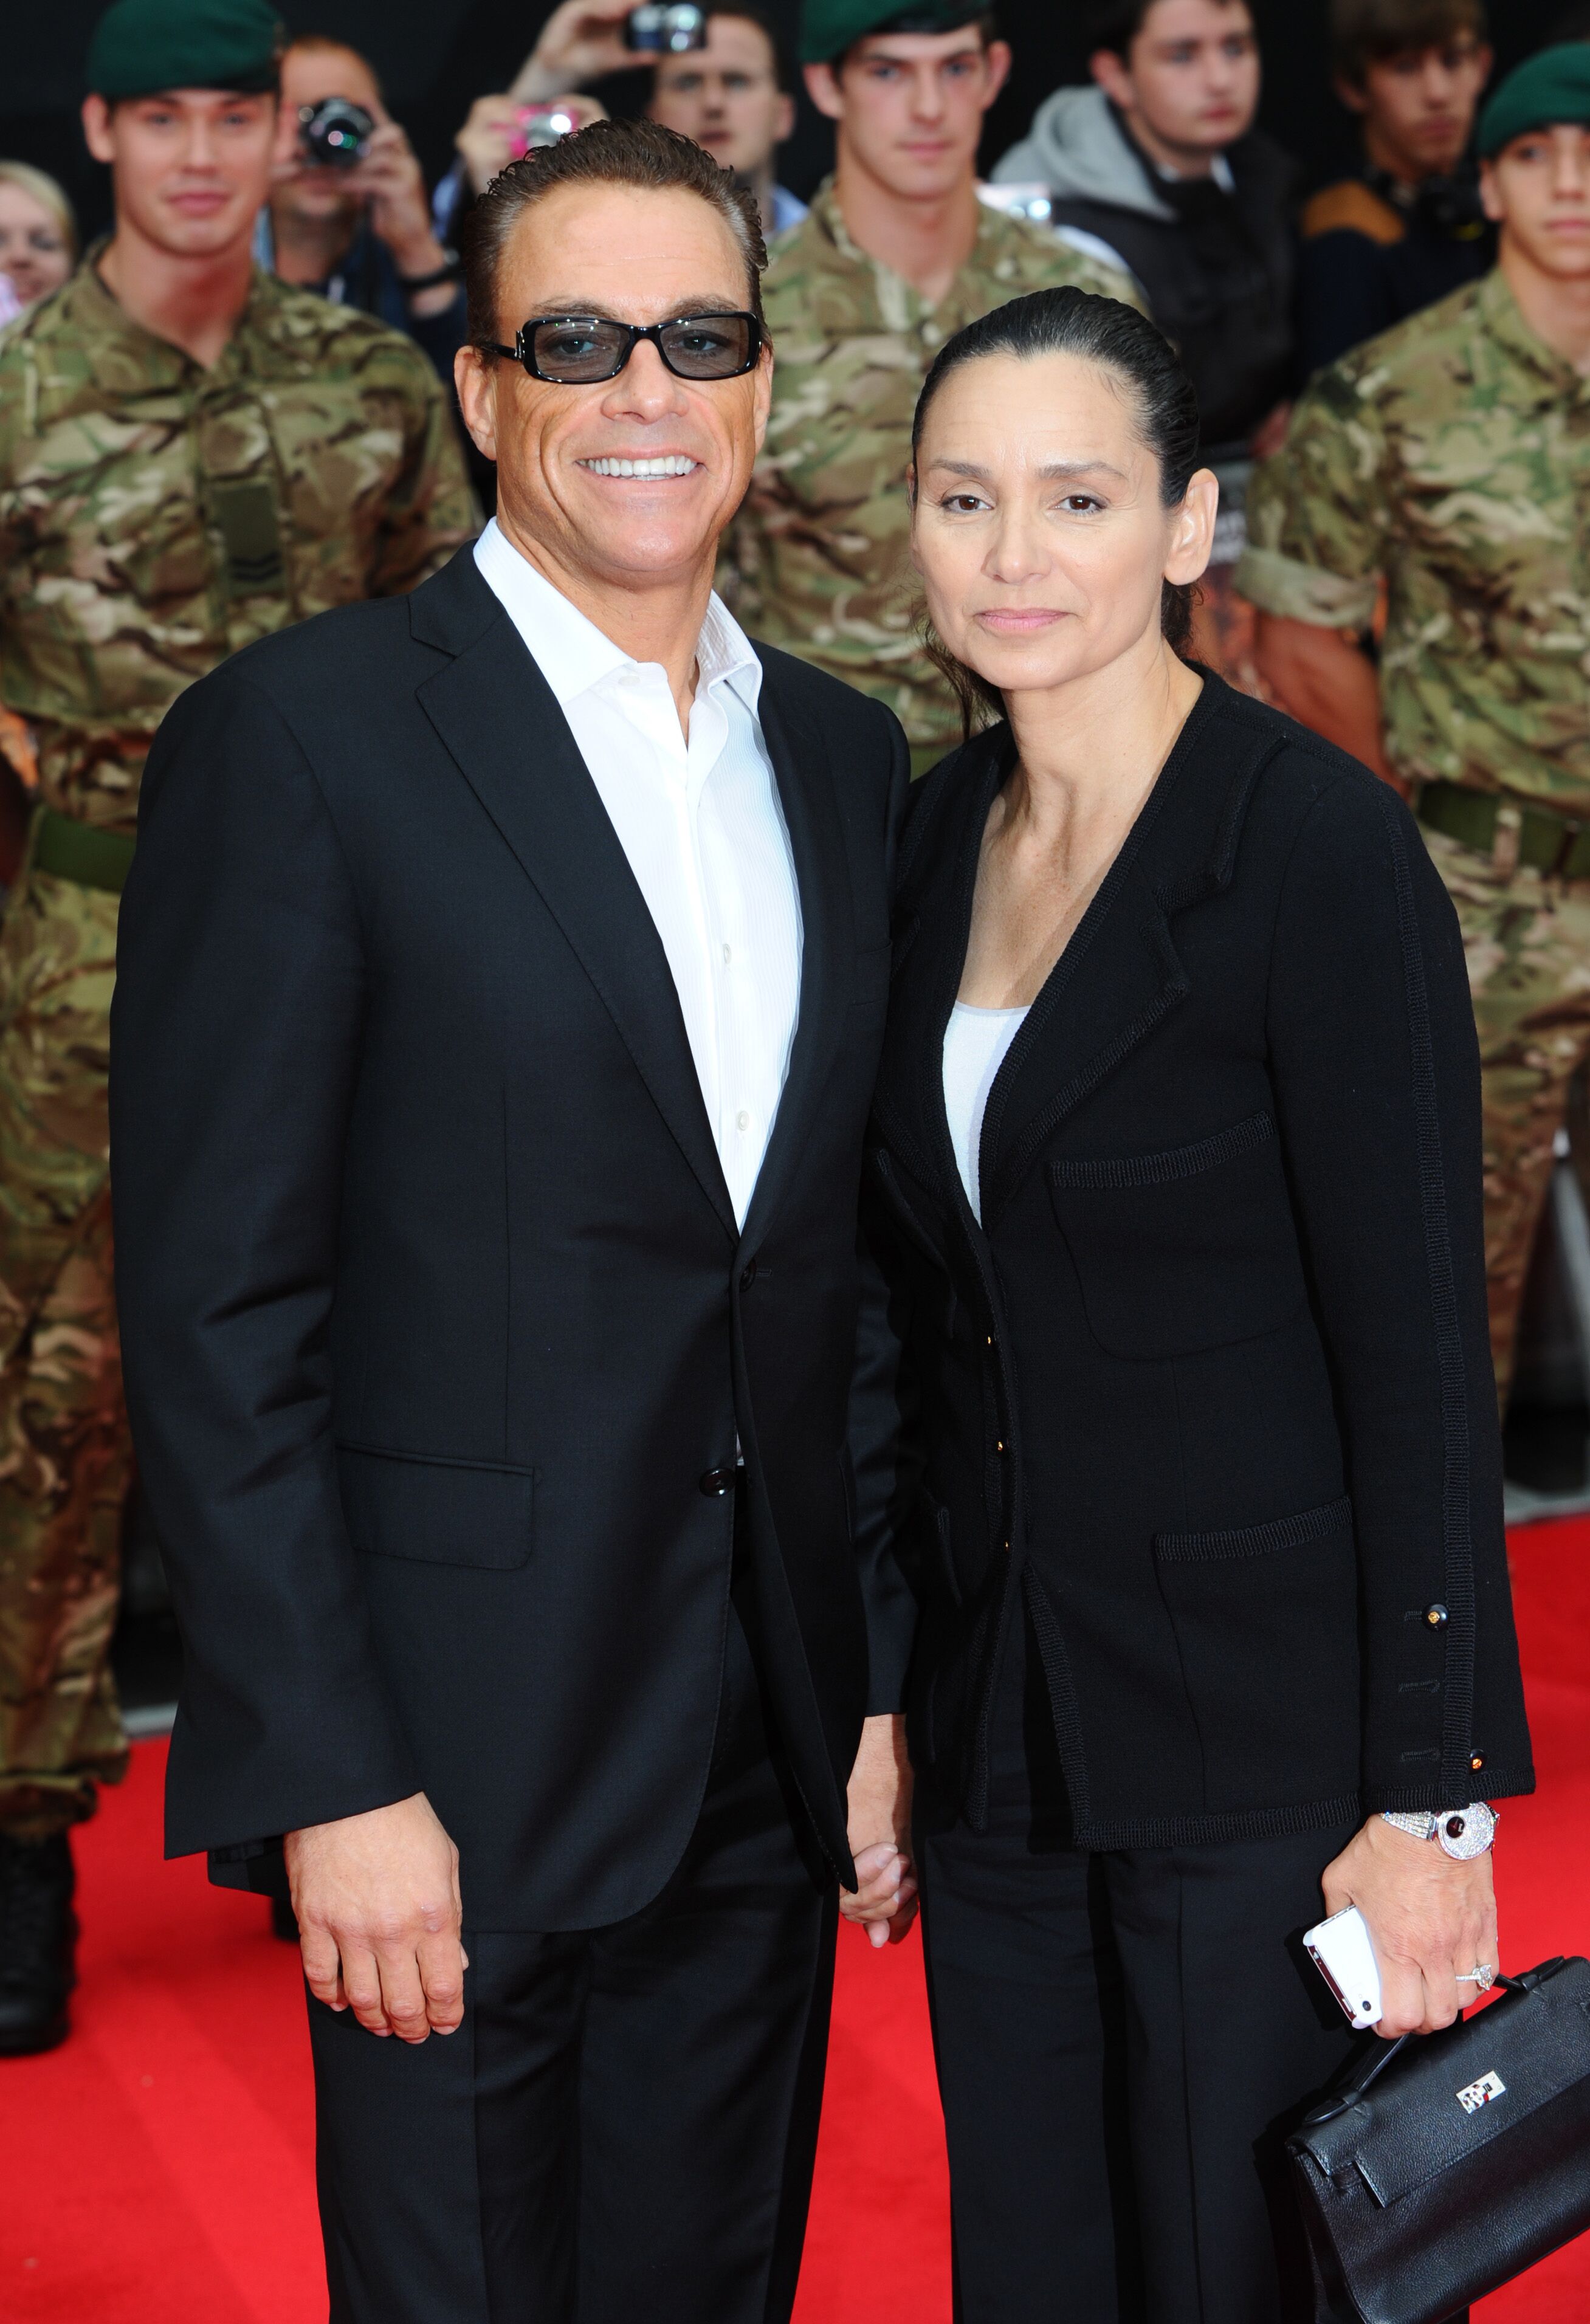 Jean-Claude Van Damme and Gladys Portugues attend "The Expendables 2" premiere. | Source: Getty Images